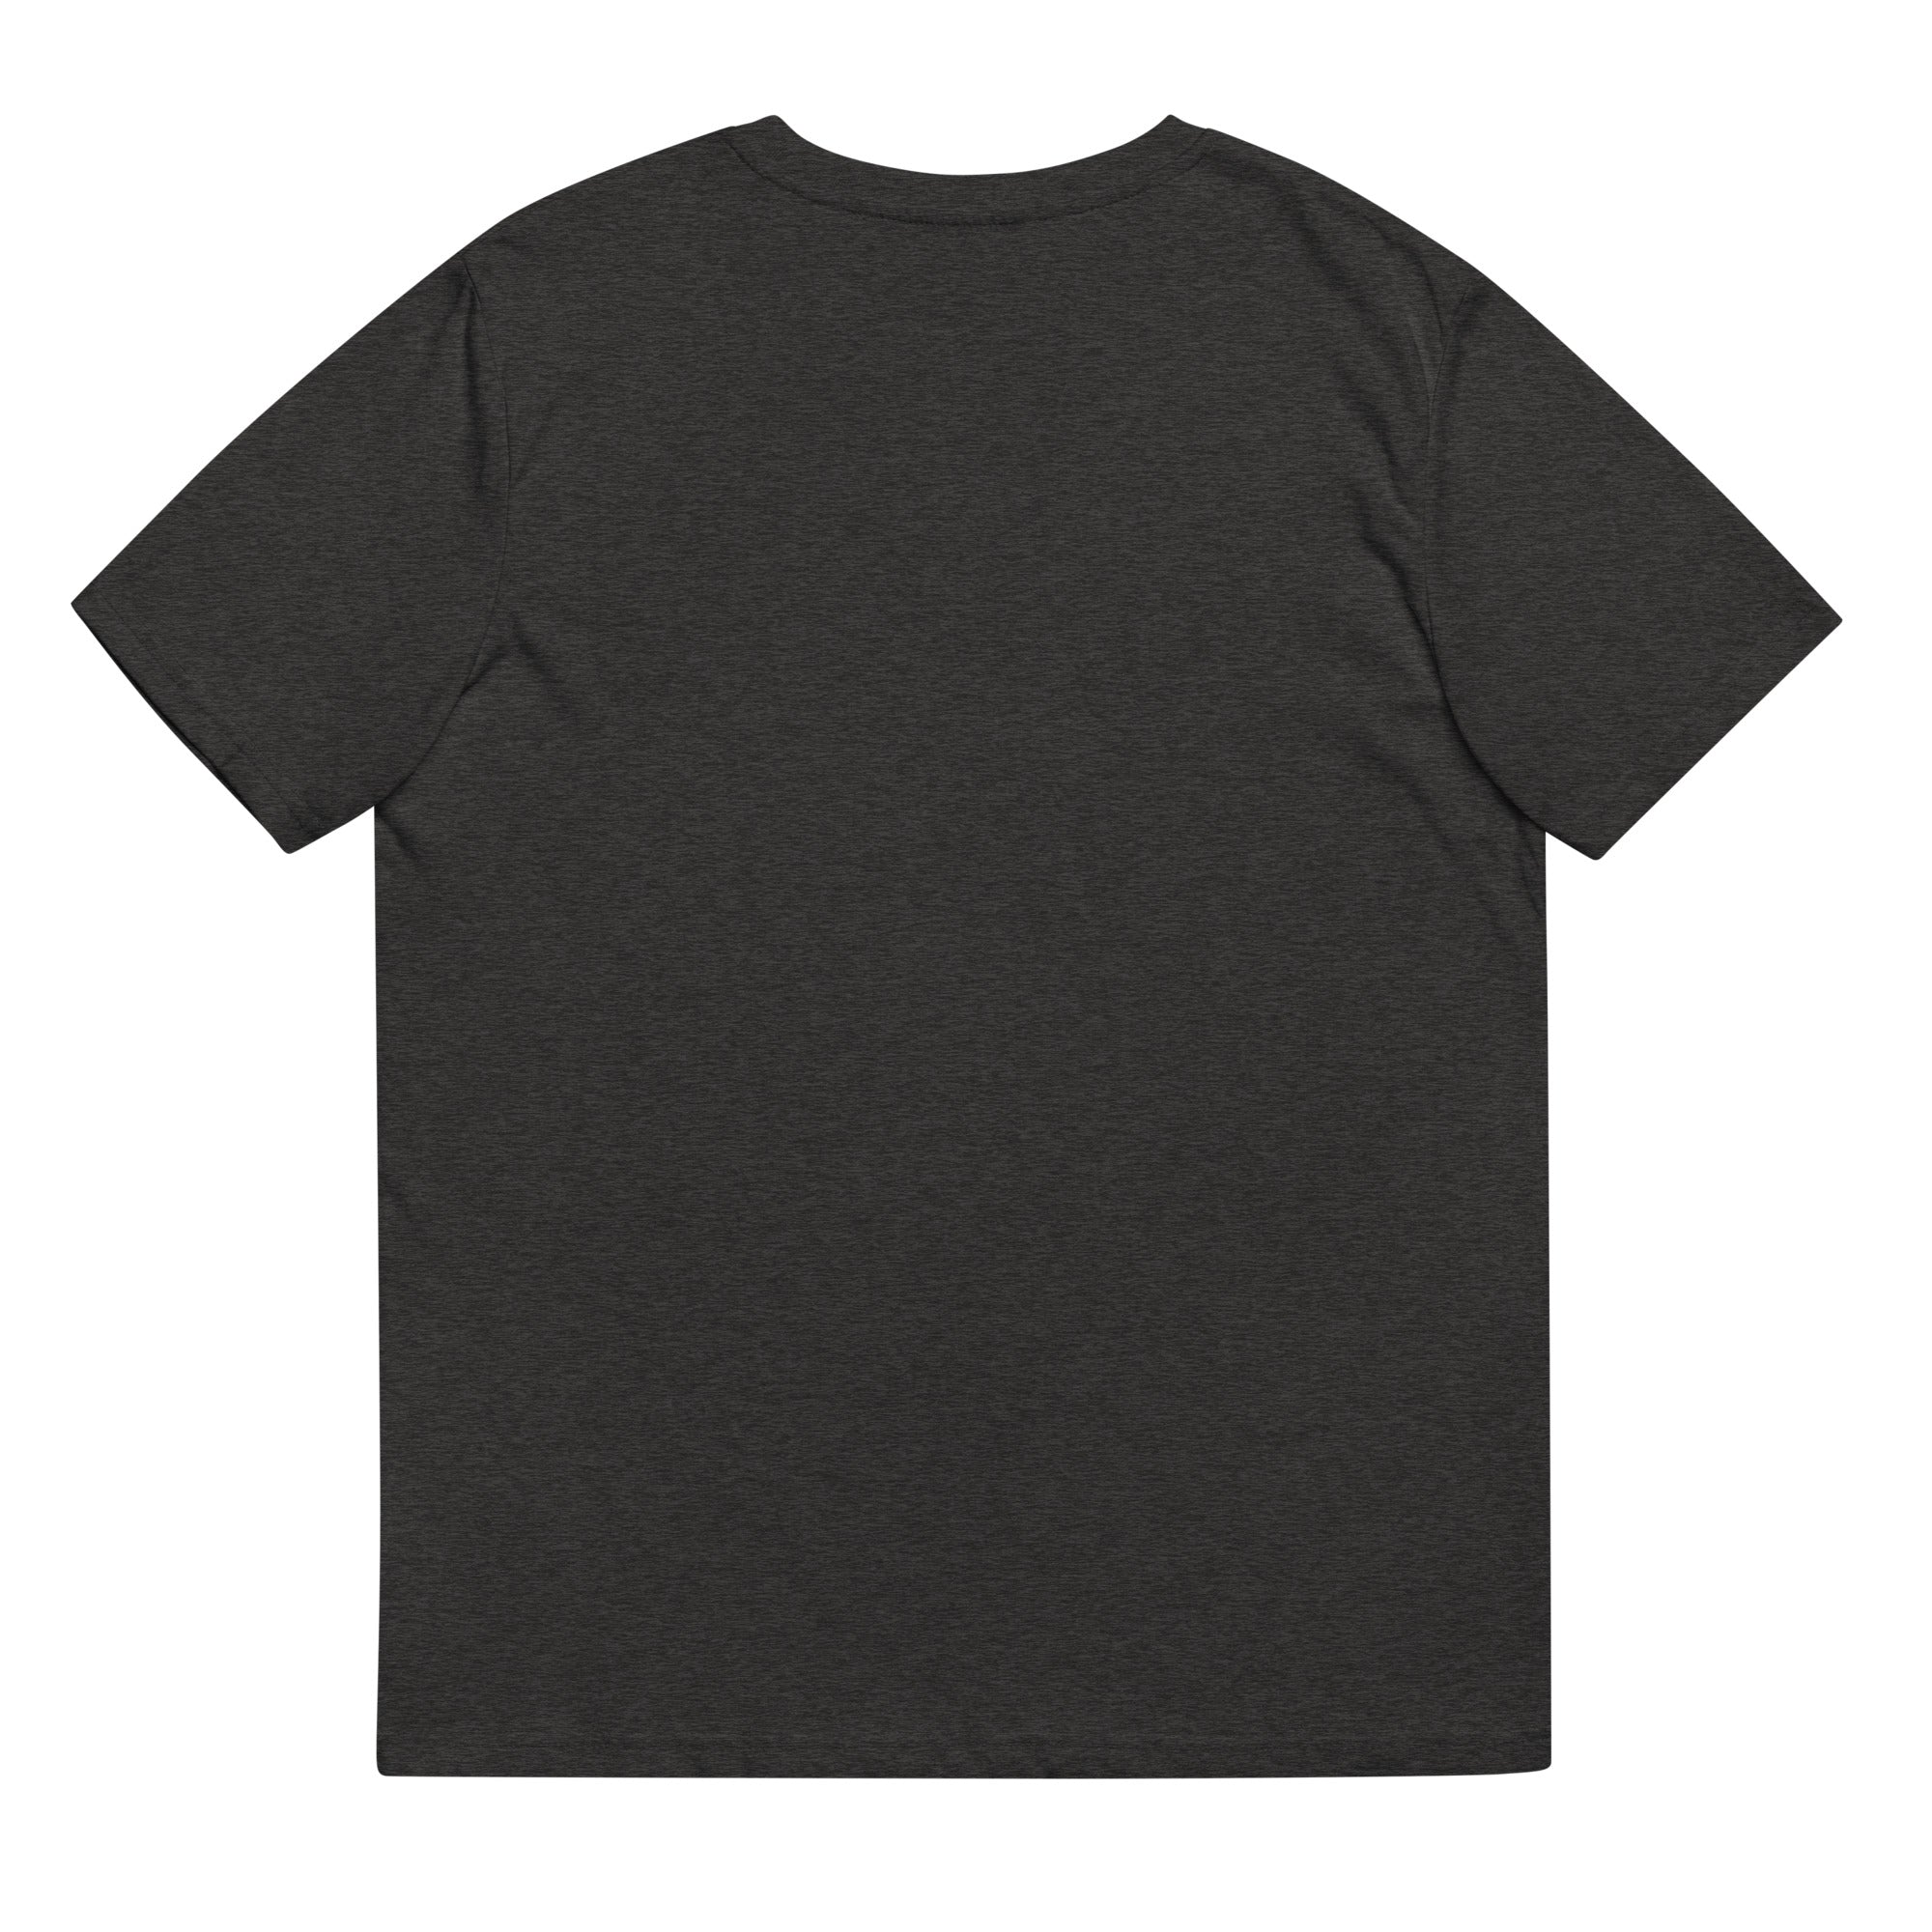 MENNITI Black T-shirt with Embroidery